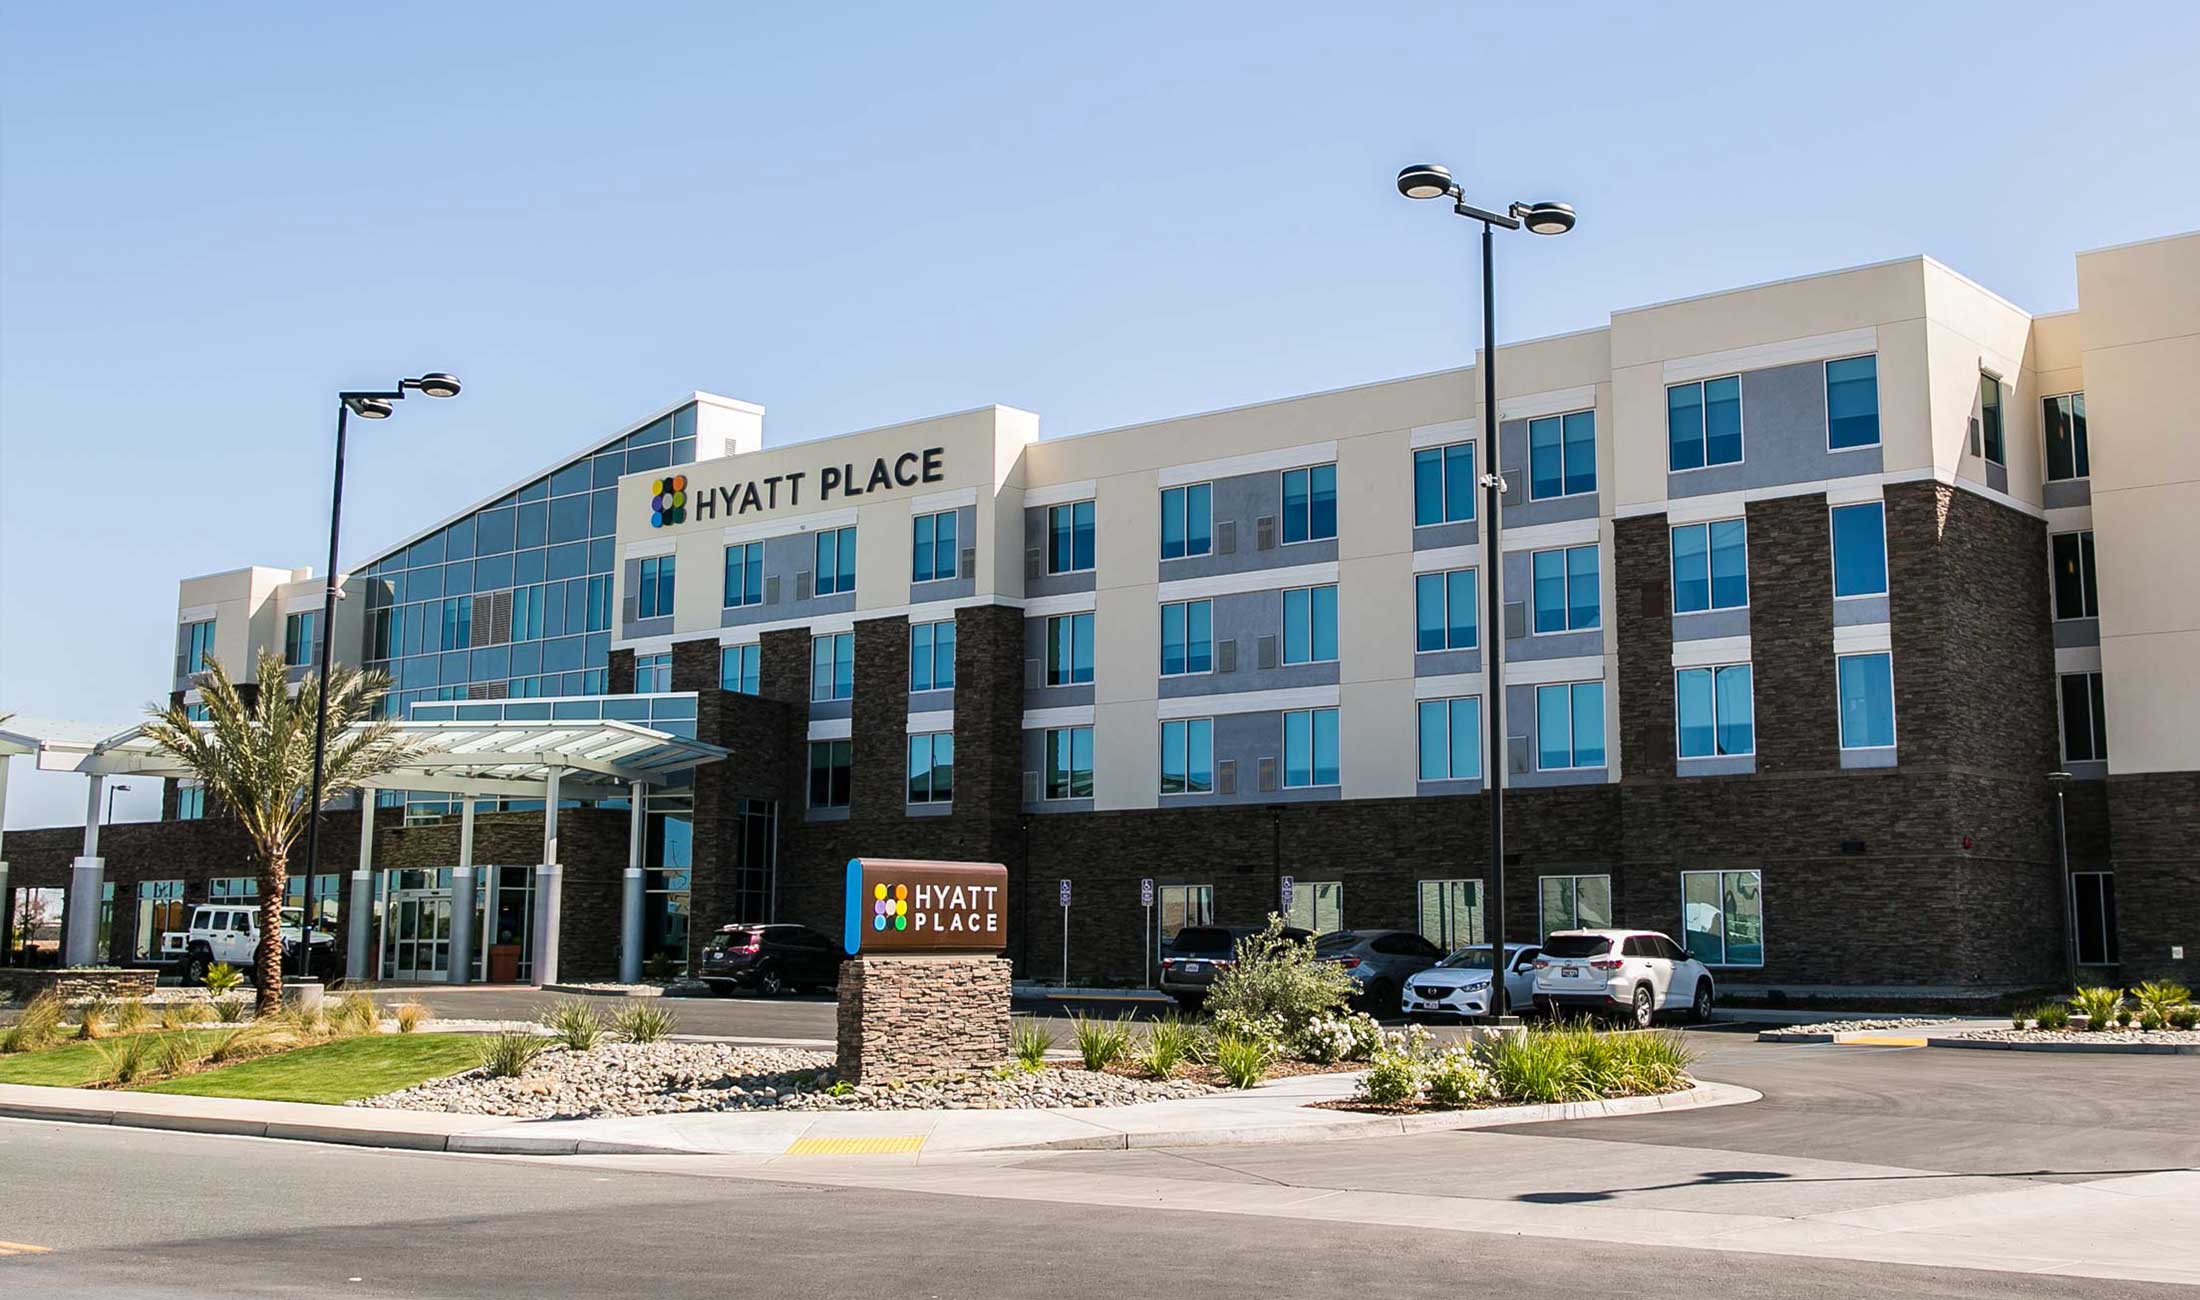 Congratulations to YK America on the Grand Opening of the Hyatt Place Delano!